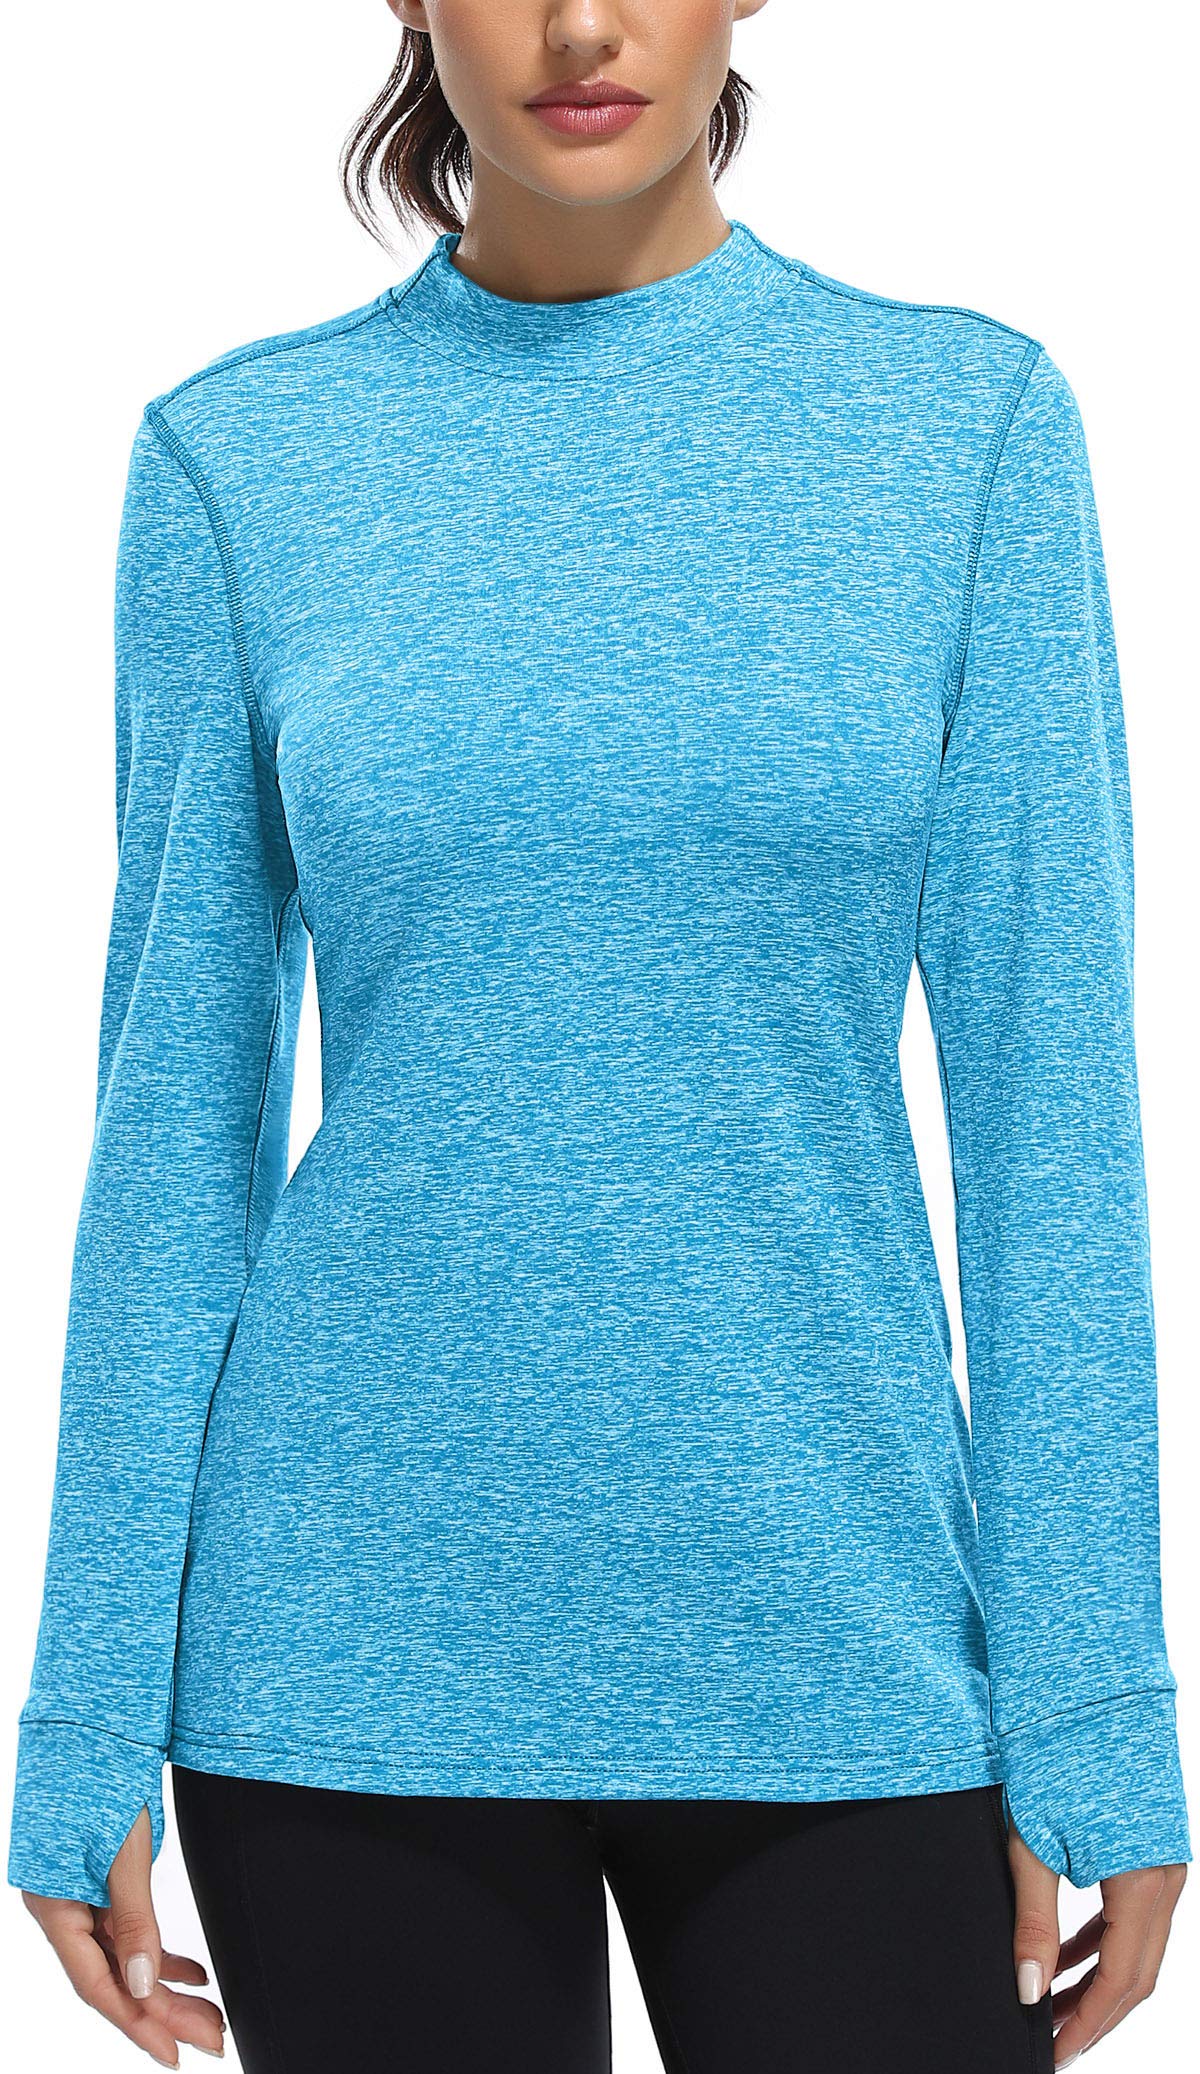 Fulbelle Thermal Fleece Lined Workout Warm Shirts Women, Mock Neck Thumb Holes Running Tops,Long Sleeve Ladies Exercise Athletic Running Gym Fitness Yoga Sweatshirts Winter Clothes Blue X-Large